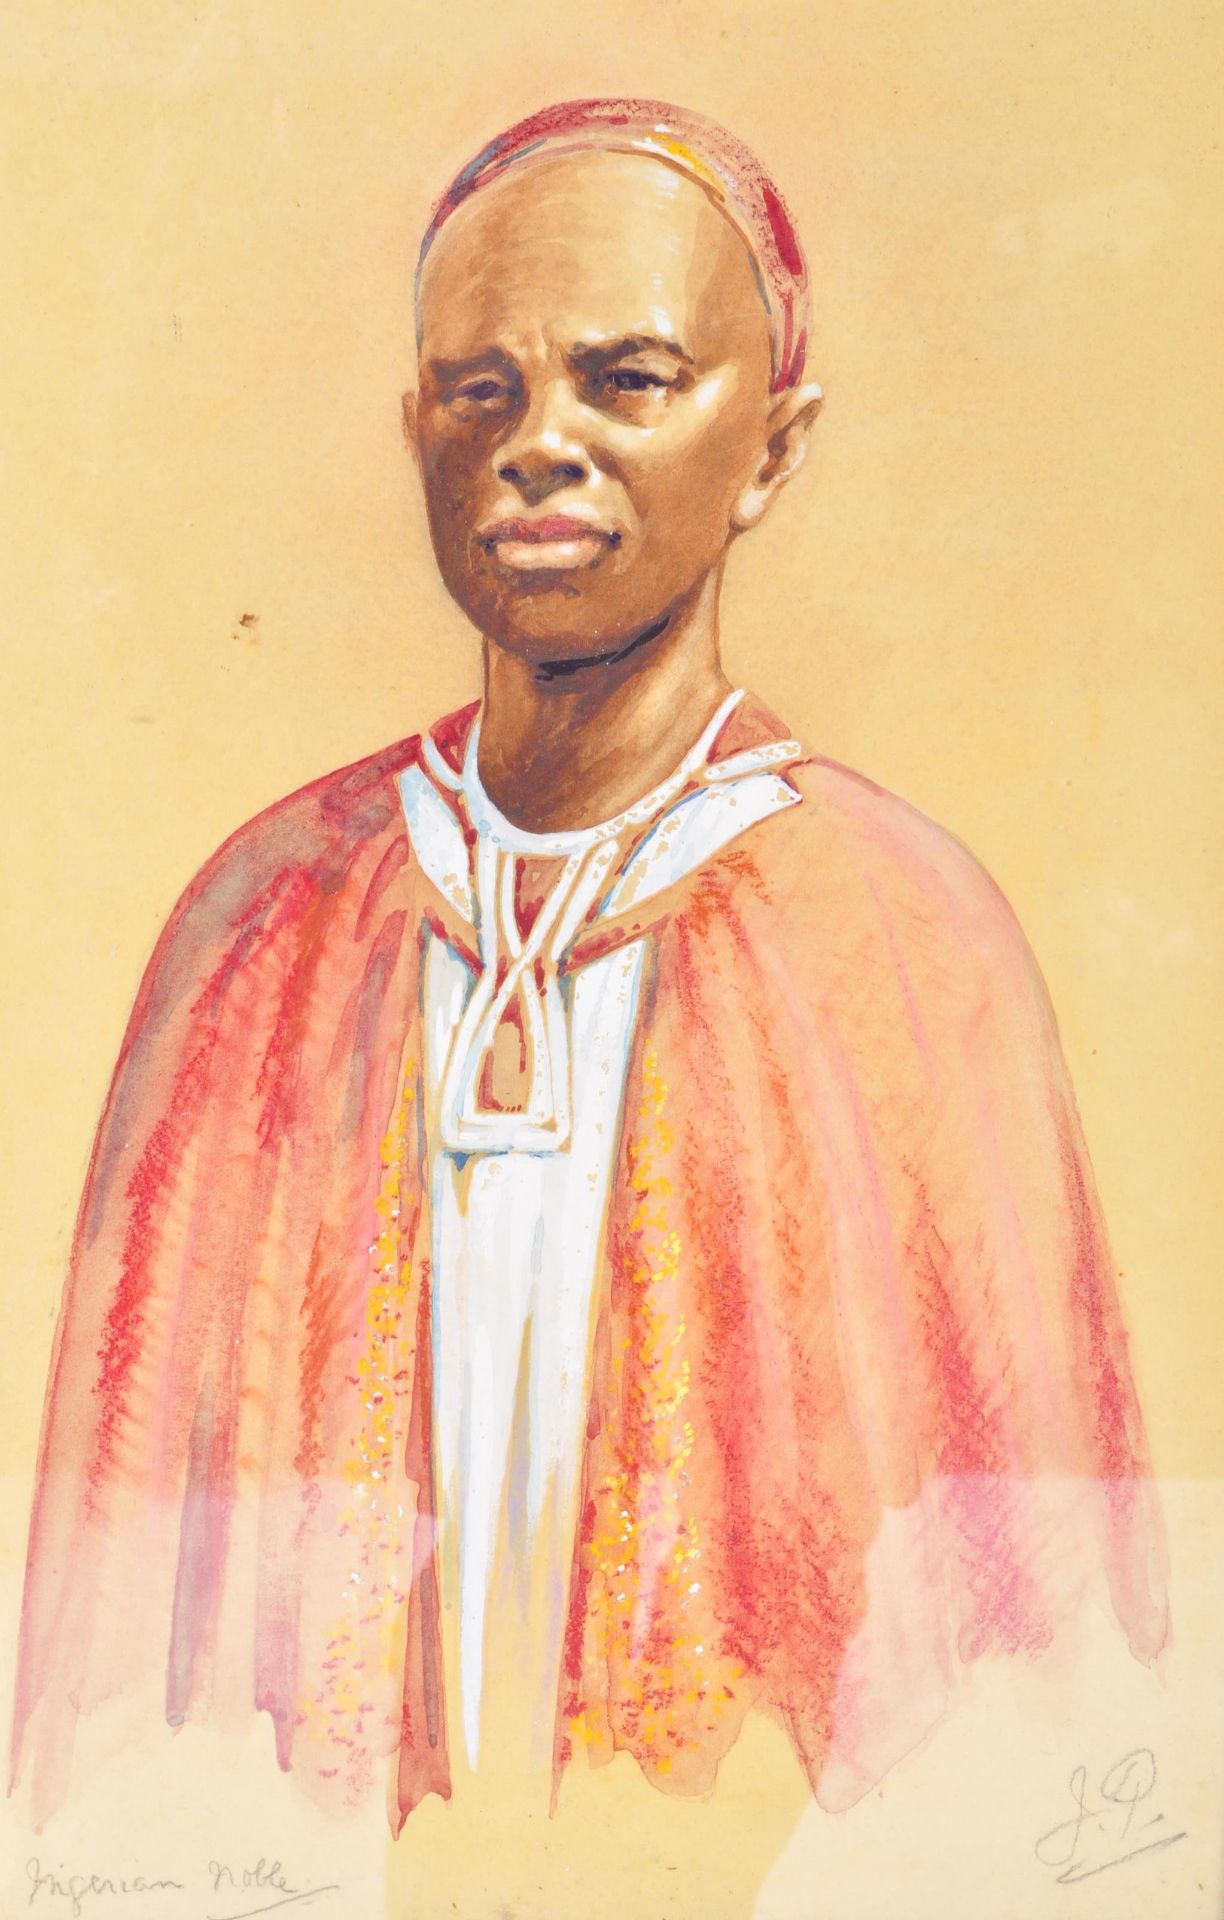 RETRO VINTAGE PASTEL PORTRAIT OF AN AFRICAN NOBLE - Image 2 of 3